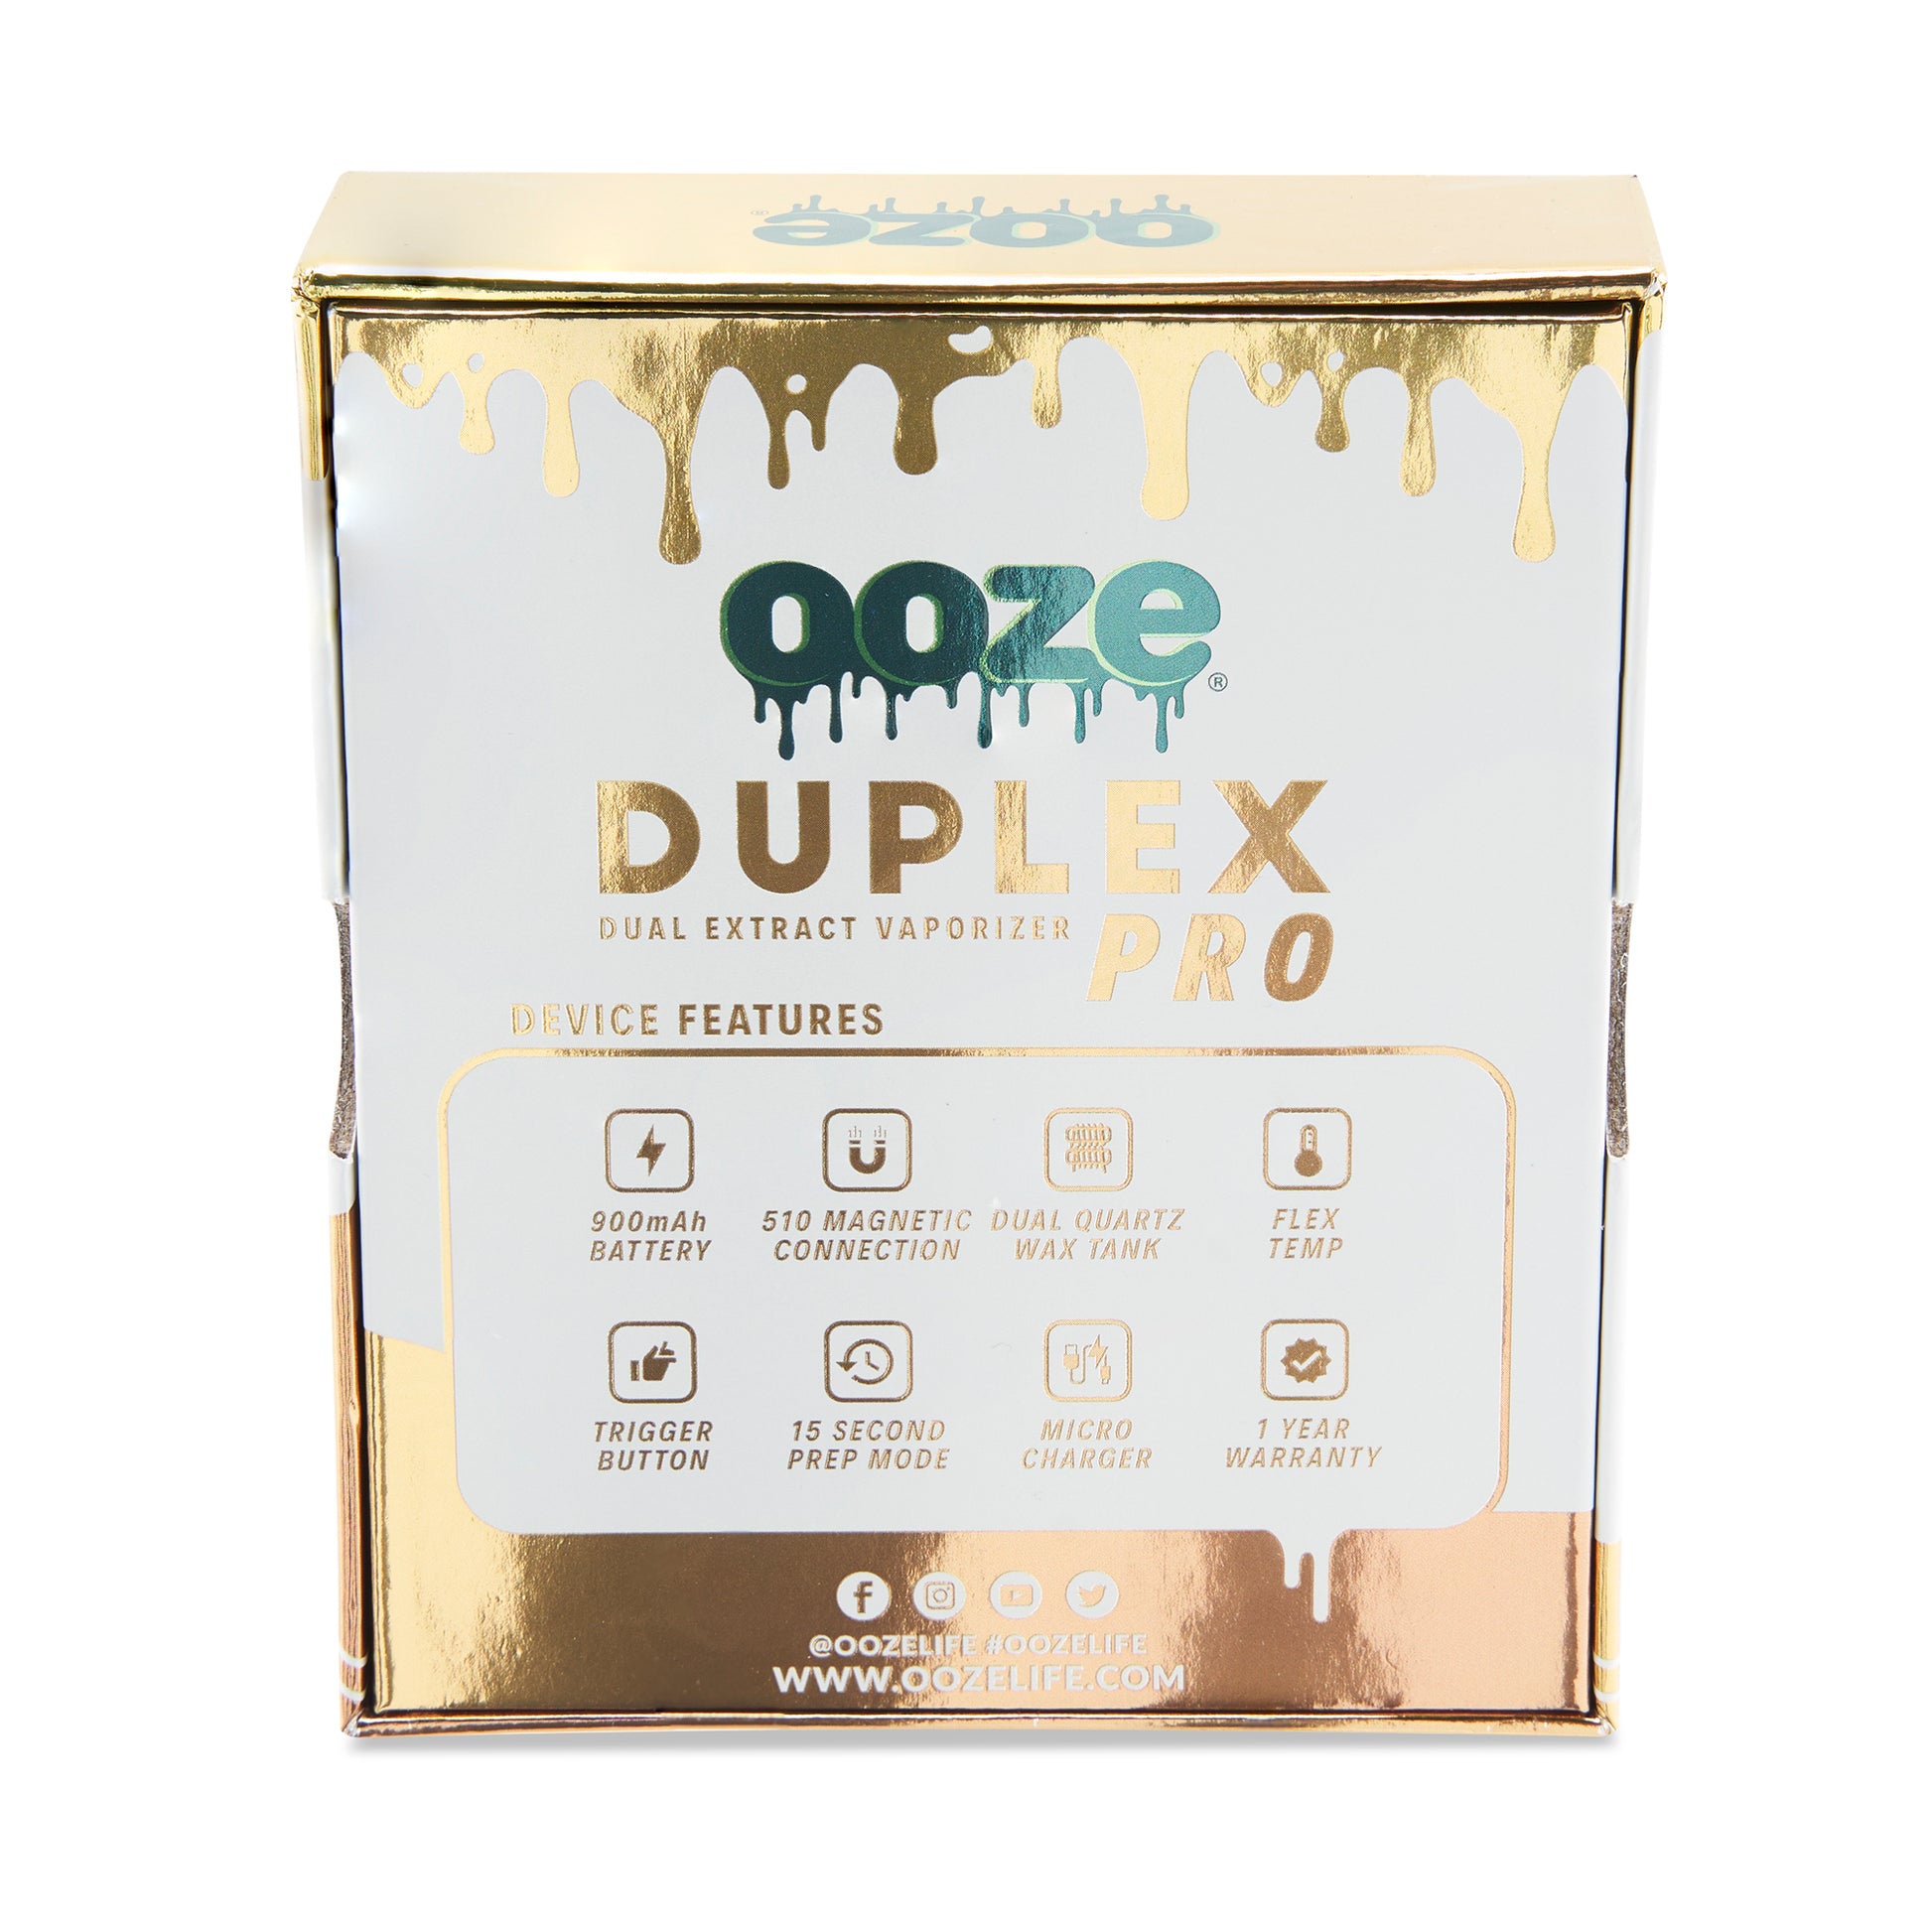 The back of the packaging for The Lucky Gold Ooze Duplex Pro Vaporizer.